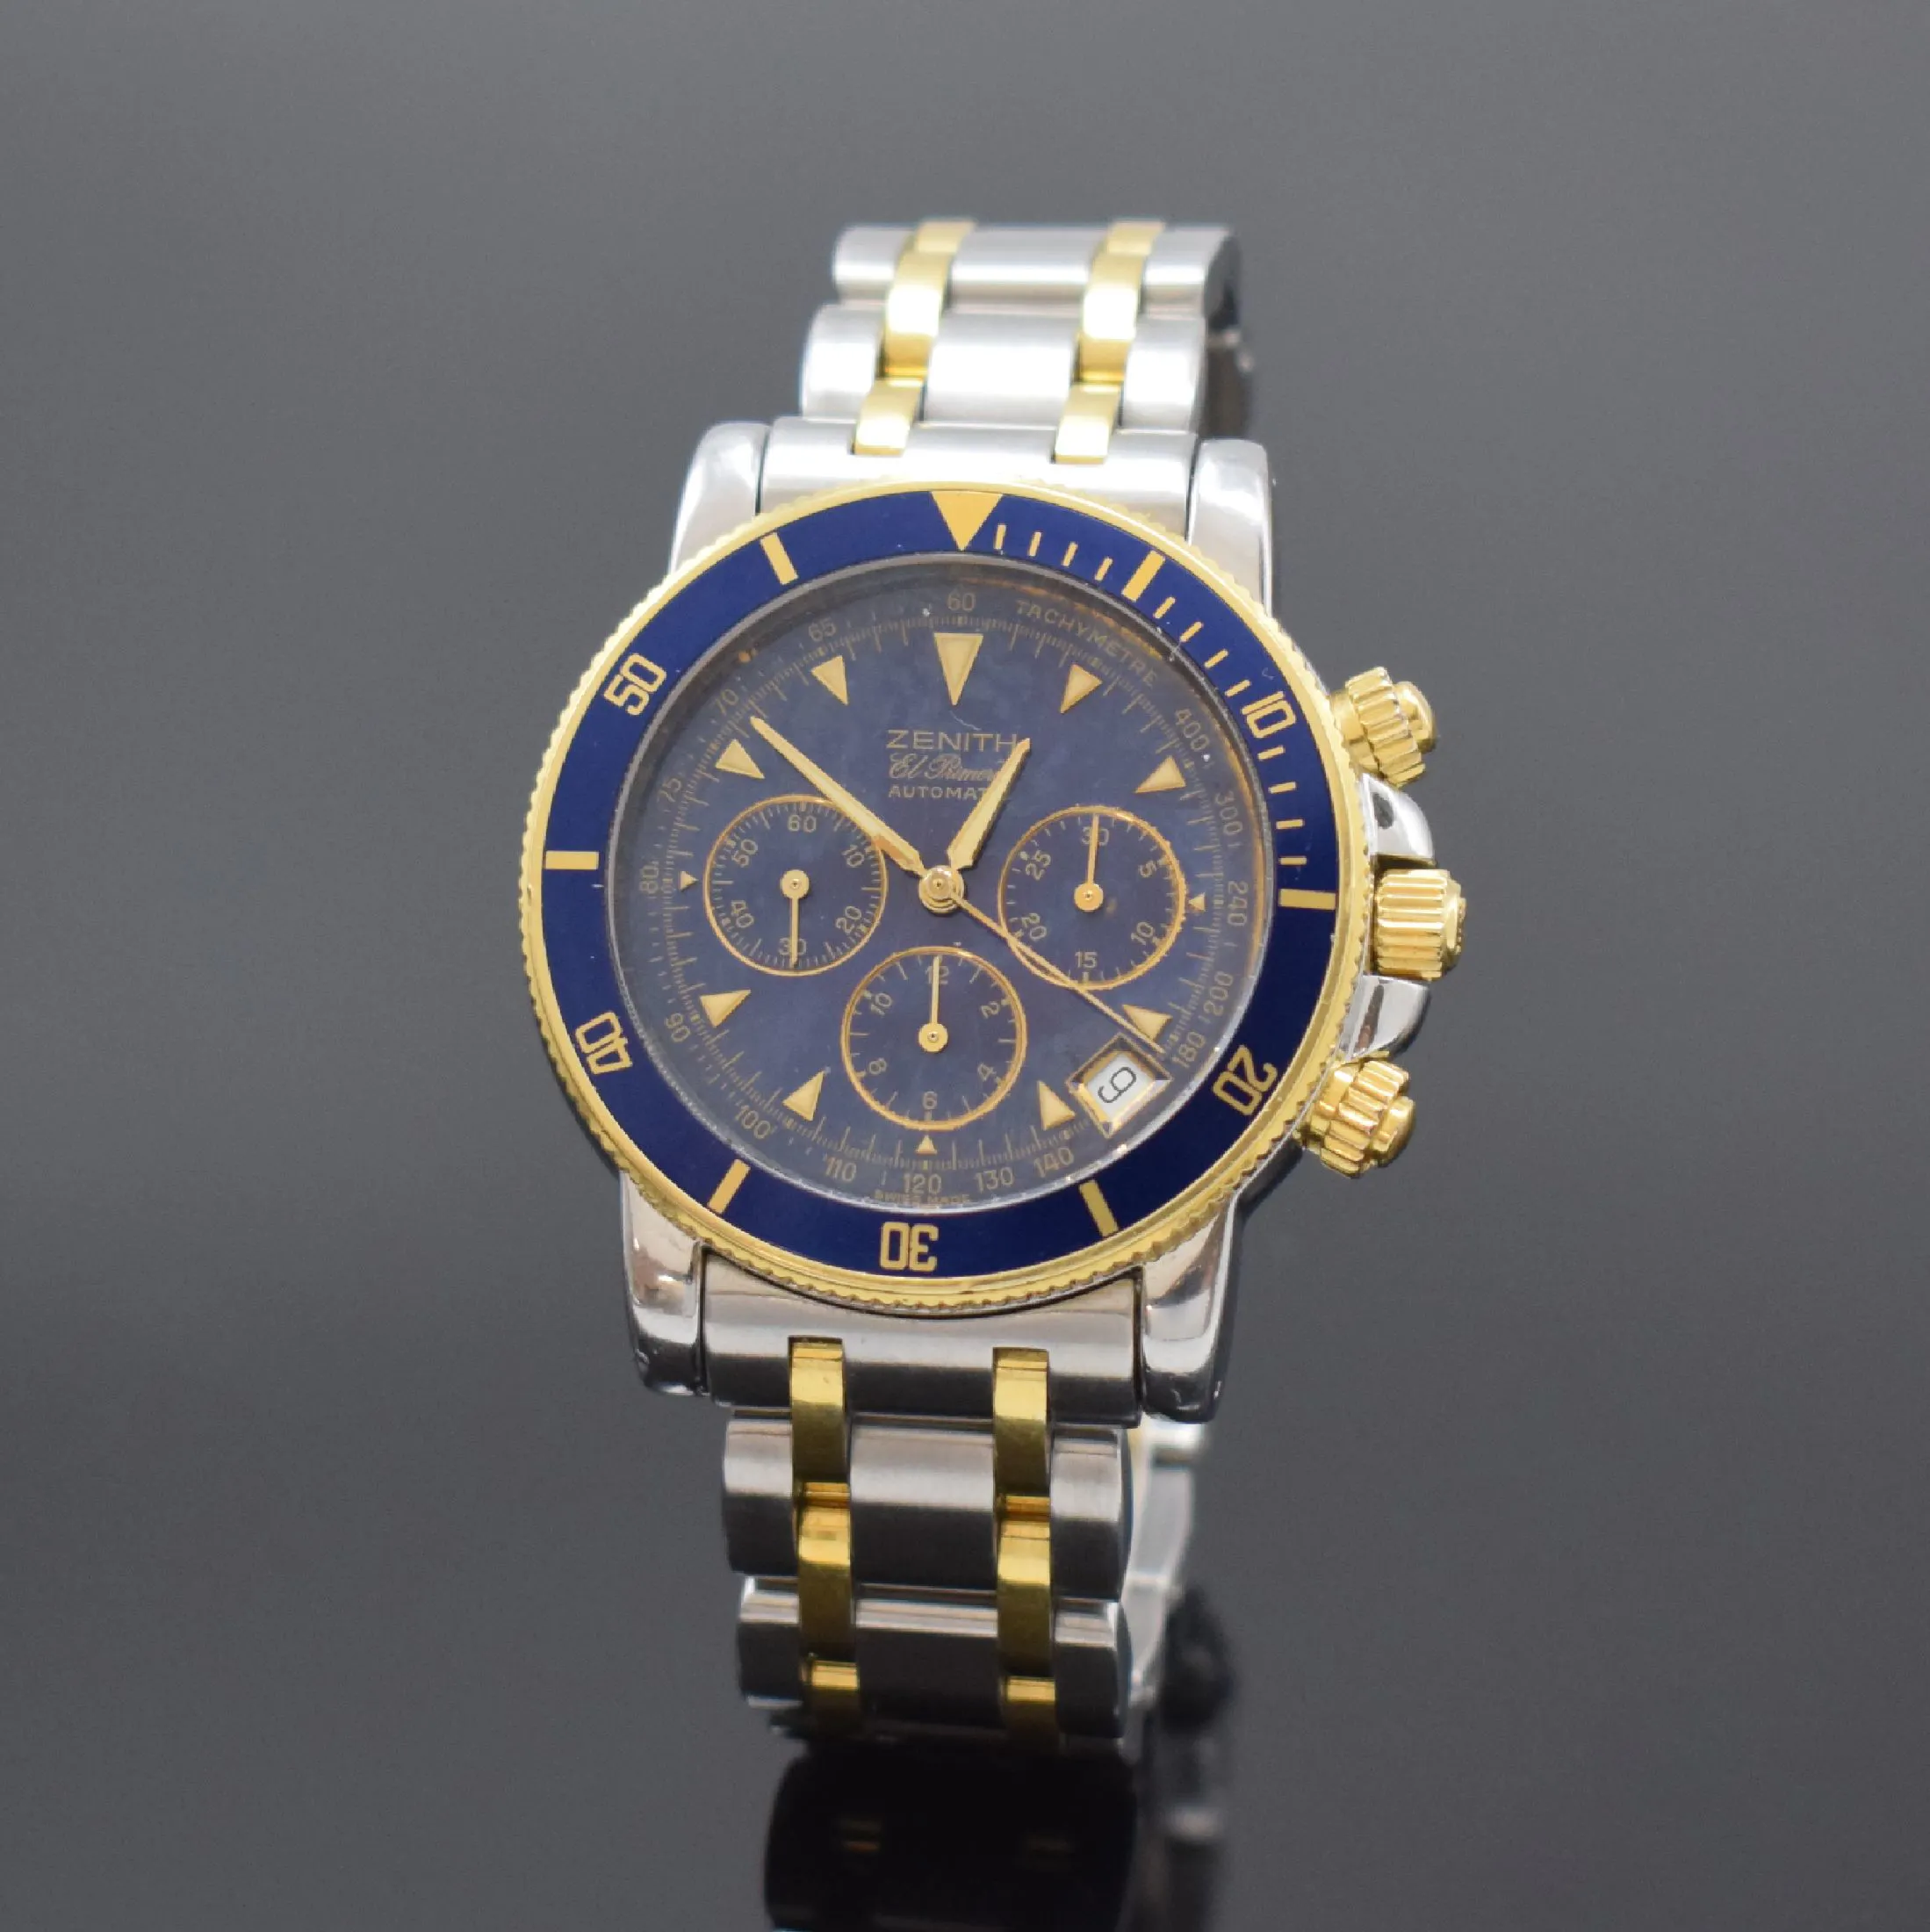 Zenith El Primero 53.0370.400 40mm Yellow gold and stainless steel Blue